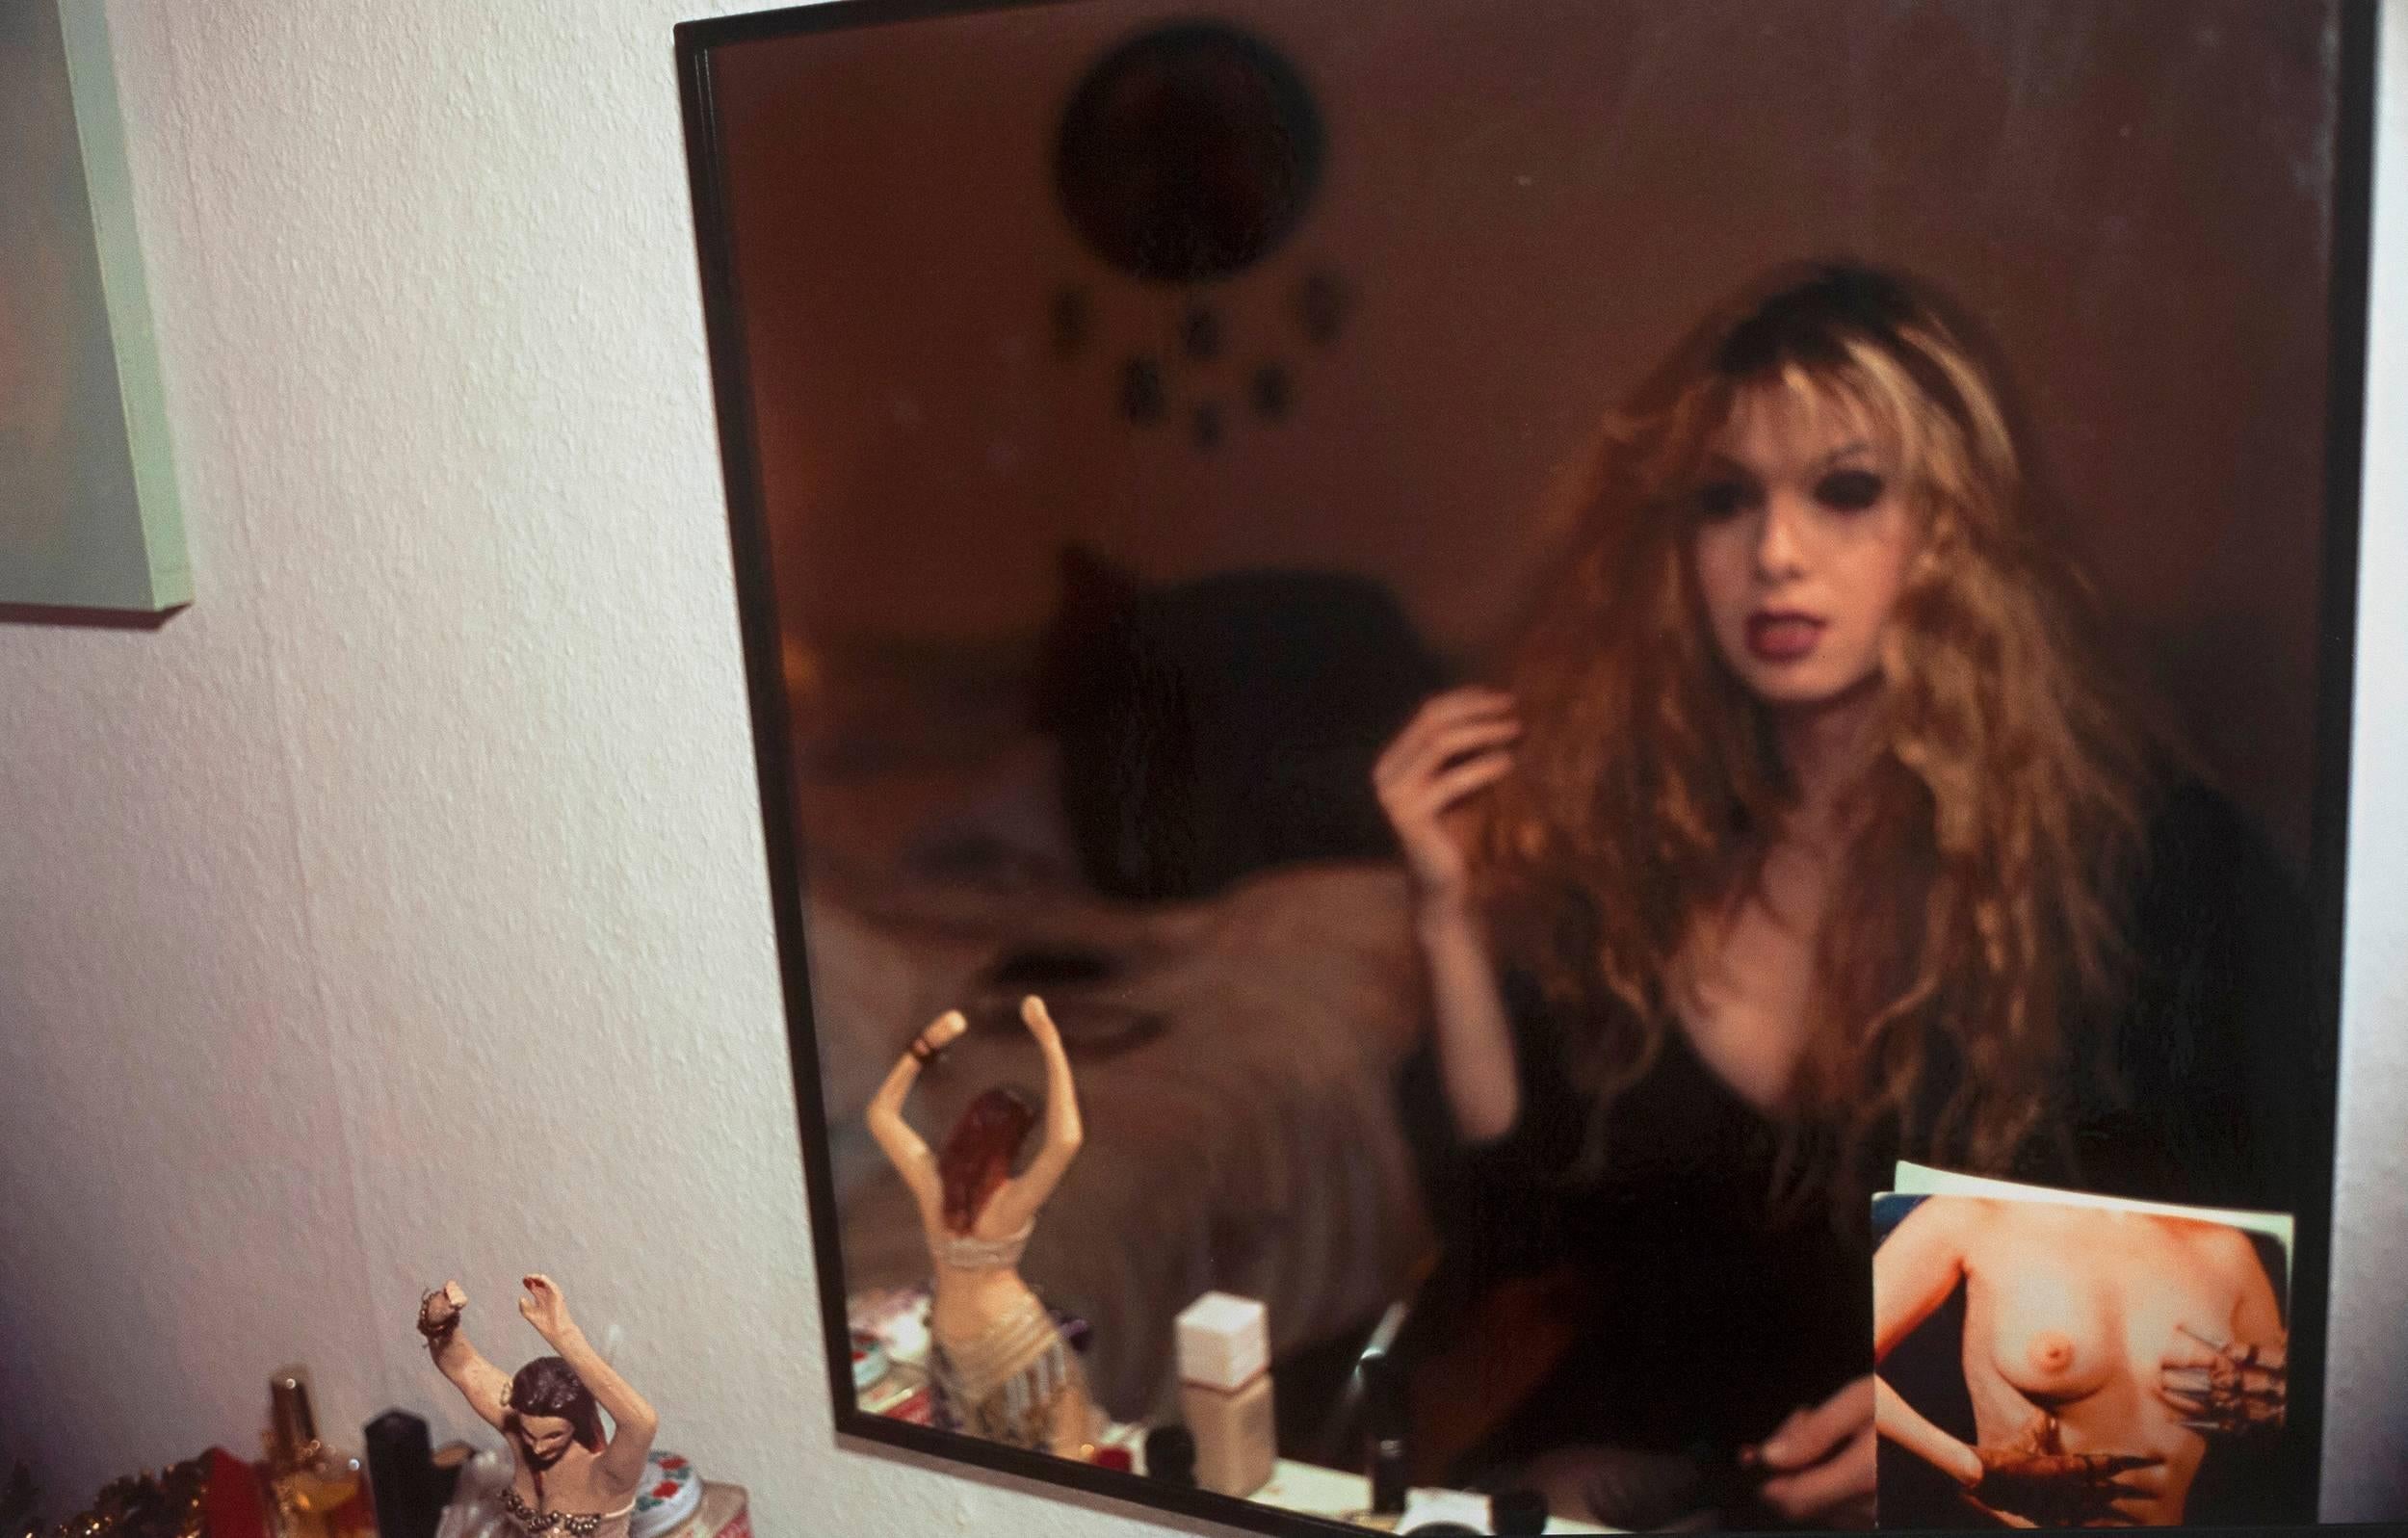 Nan Goldin (b. 1953) is unquestionably one of the most influential photographers of the 20th century. 

A successor to Diane Arbus, her aesthetic and creative approach had a tremendous impact on both the medium and the art world. 

Goldin was the